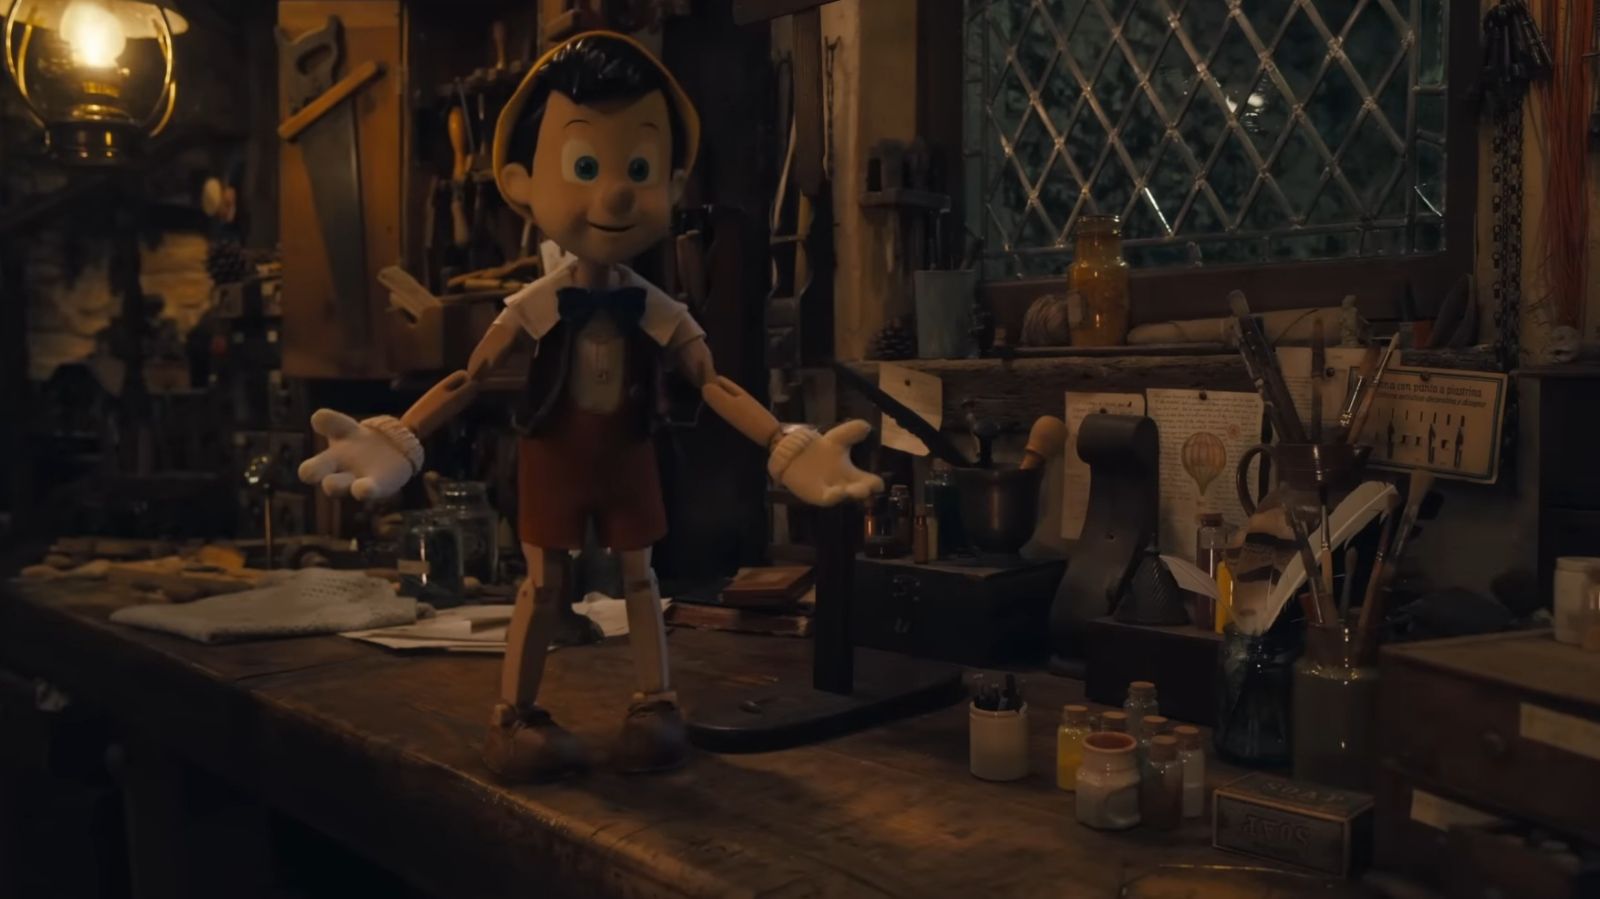 Pinocchio review – Zemeckis and Hanks reunite for well-made yet cold remake, Tom Hanks